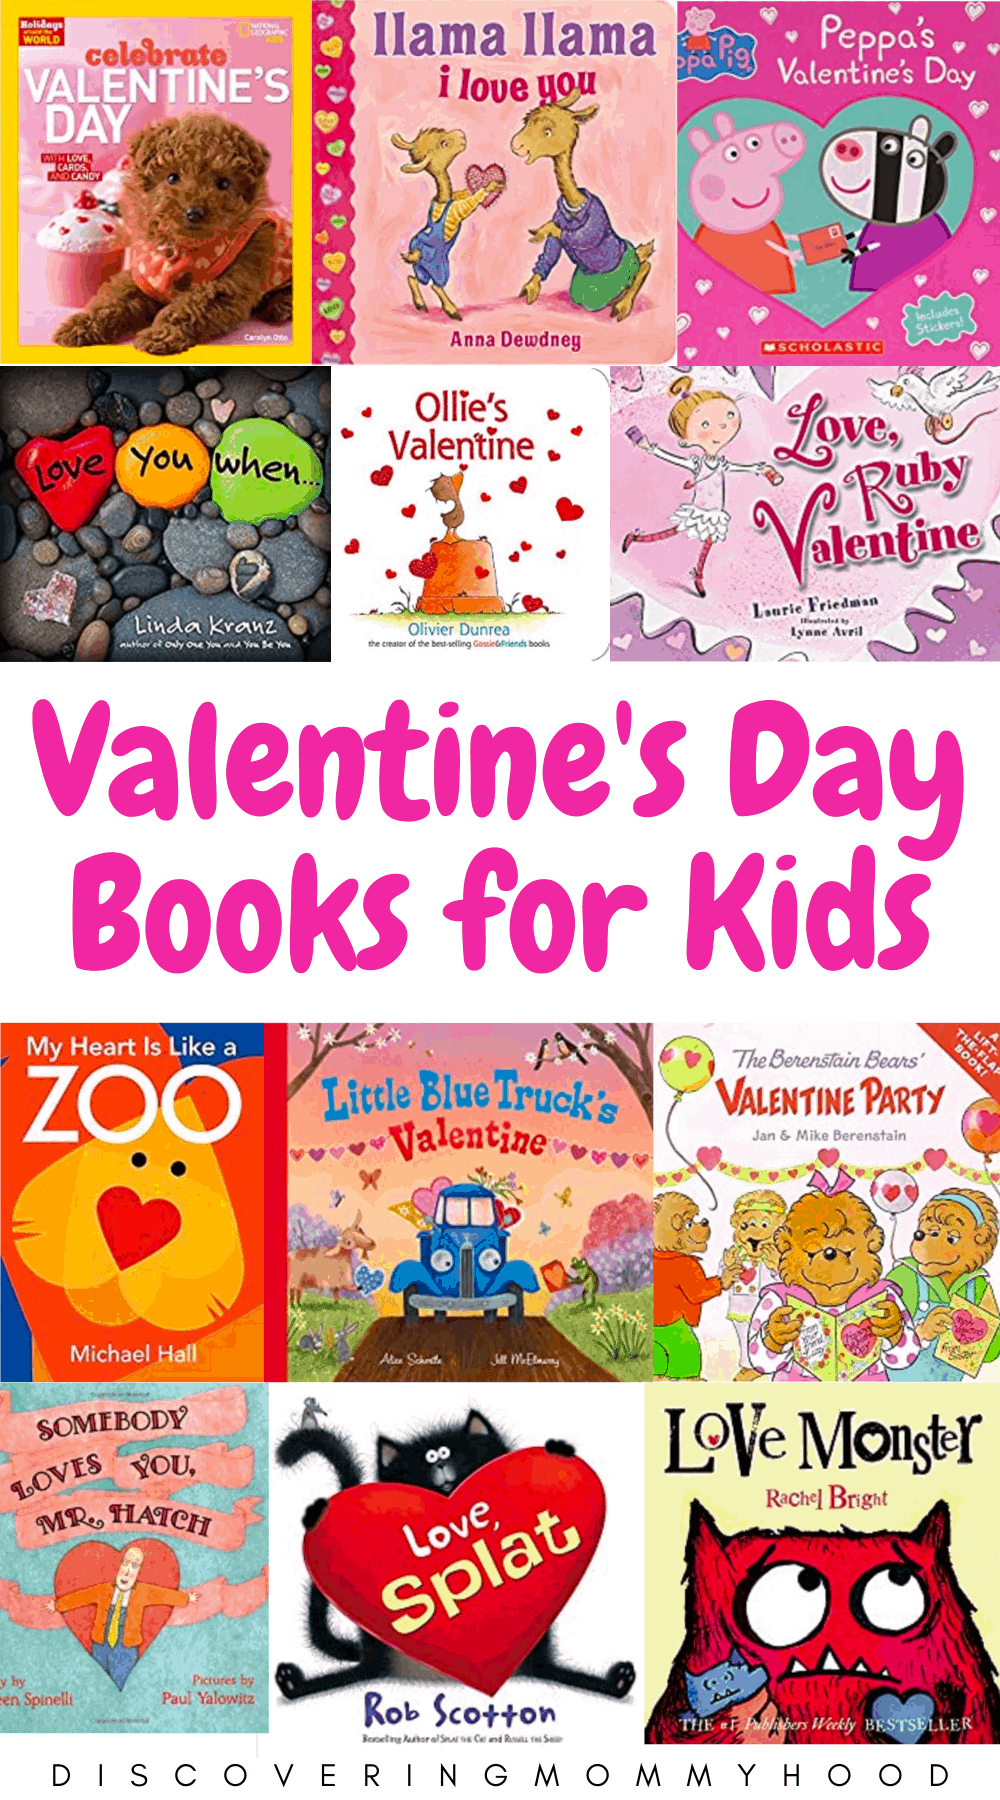 sweet-valentine-s-day-books-for-preschoolers-discovering-mommyhood